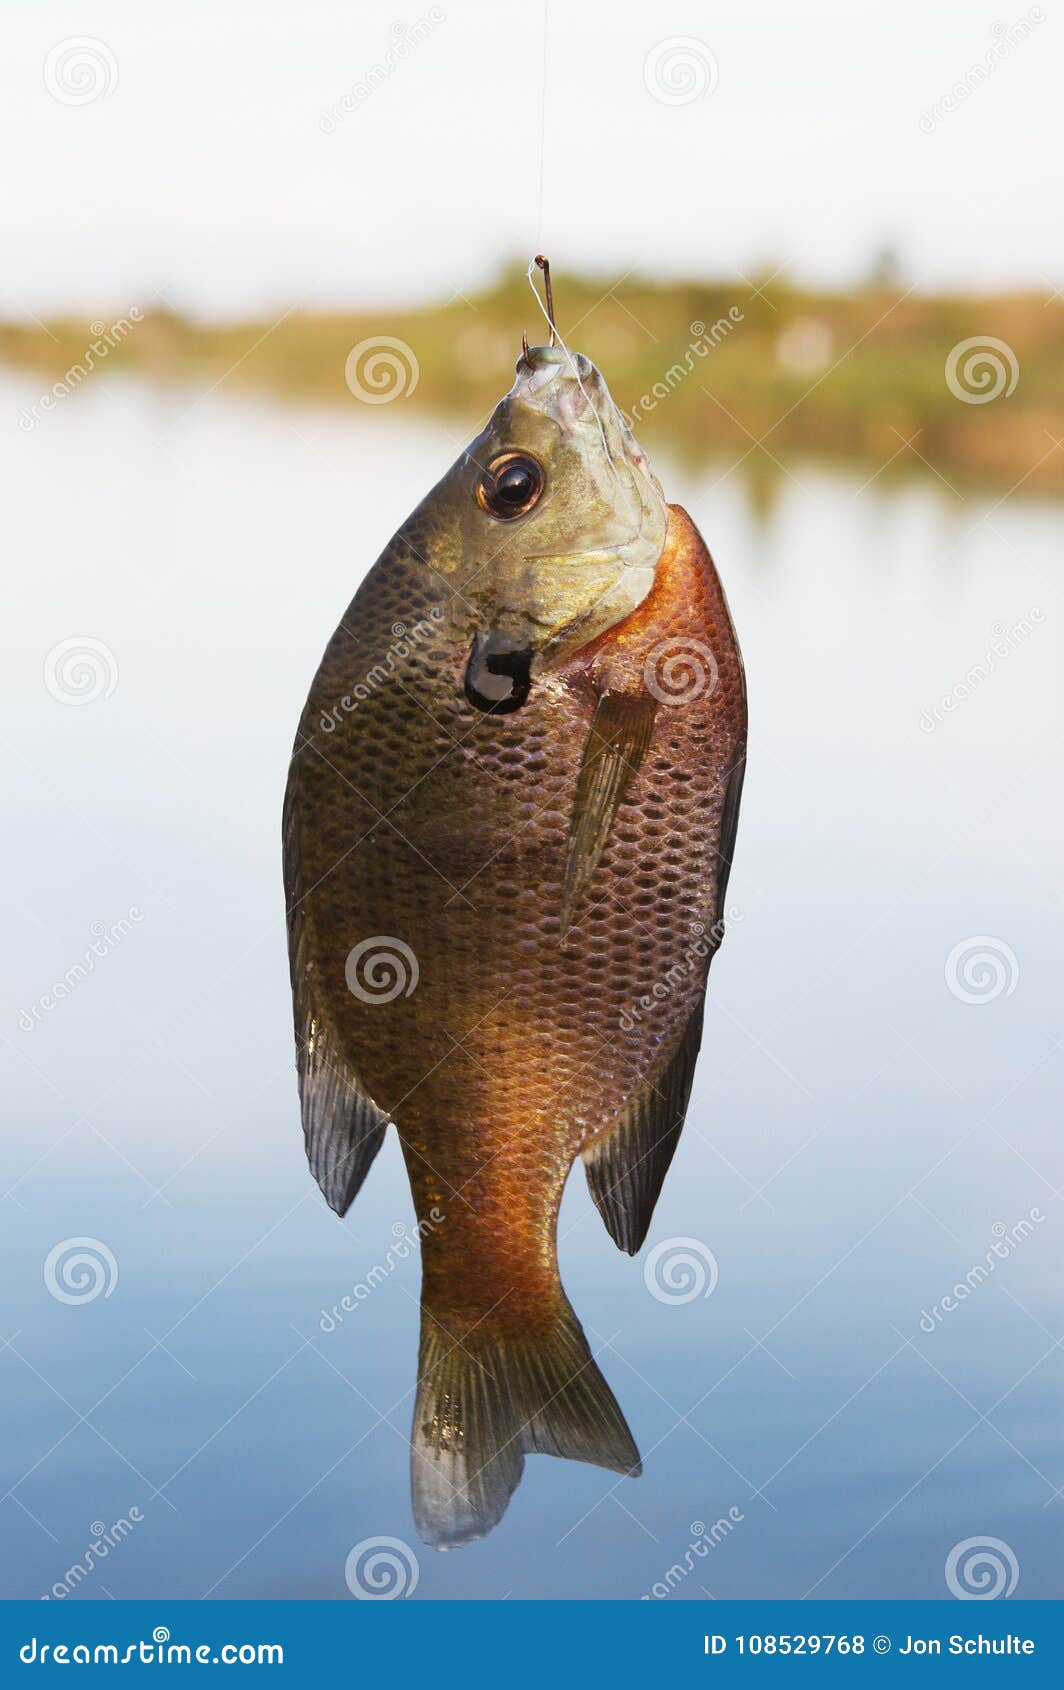 A caught fish on hook stock photo. Image of hook, caught - 108529768